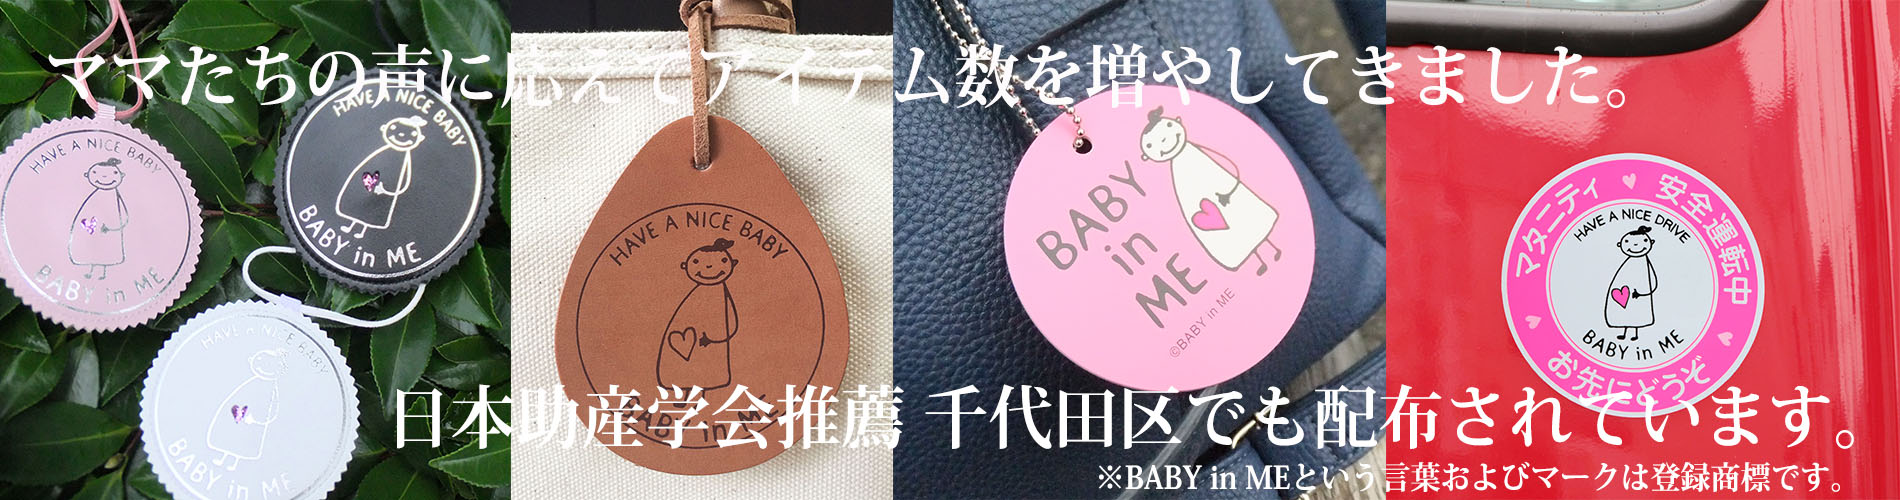 BABY in MEは、日本助産学会推薦。BABY in MEのバッグチャームは、千代田区でも配布されています。